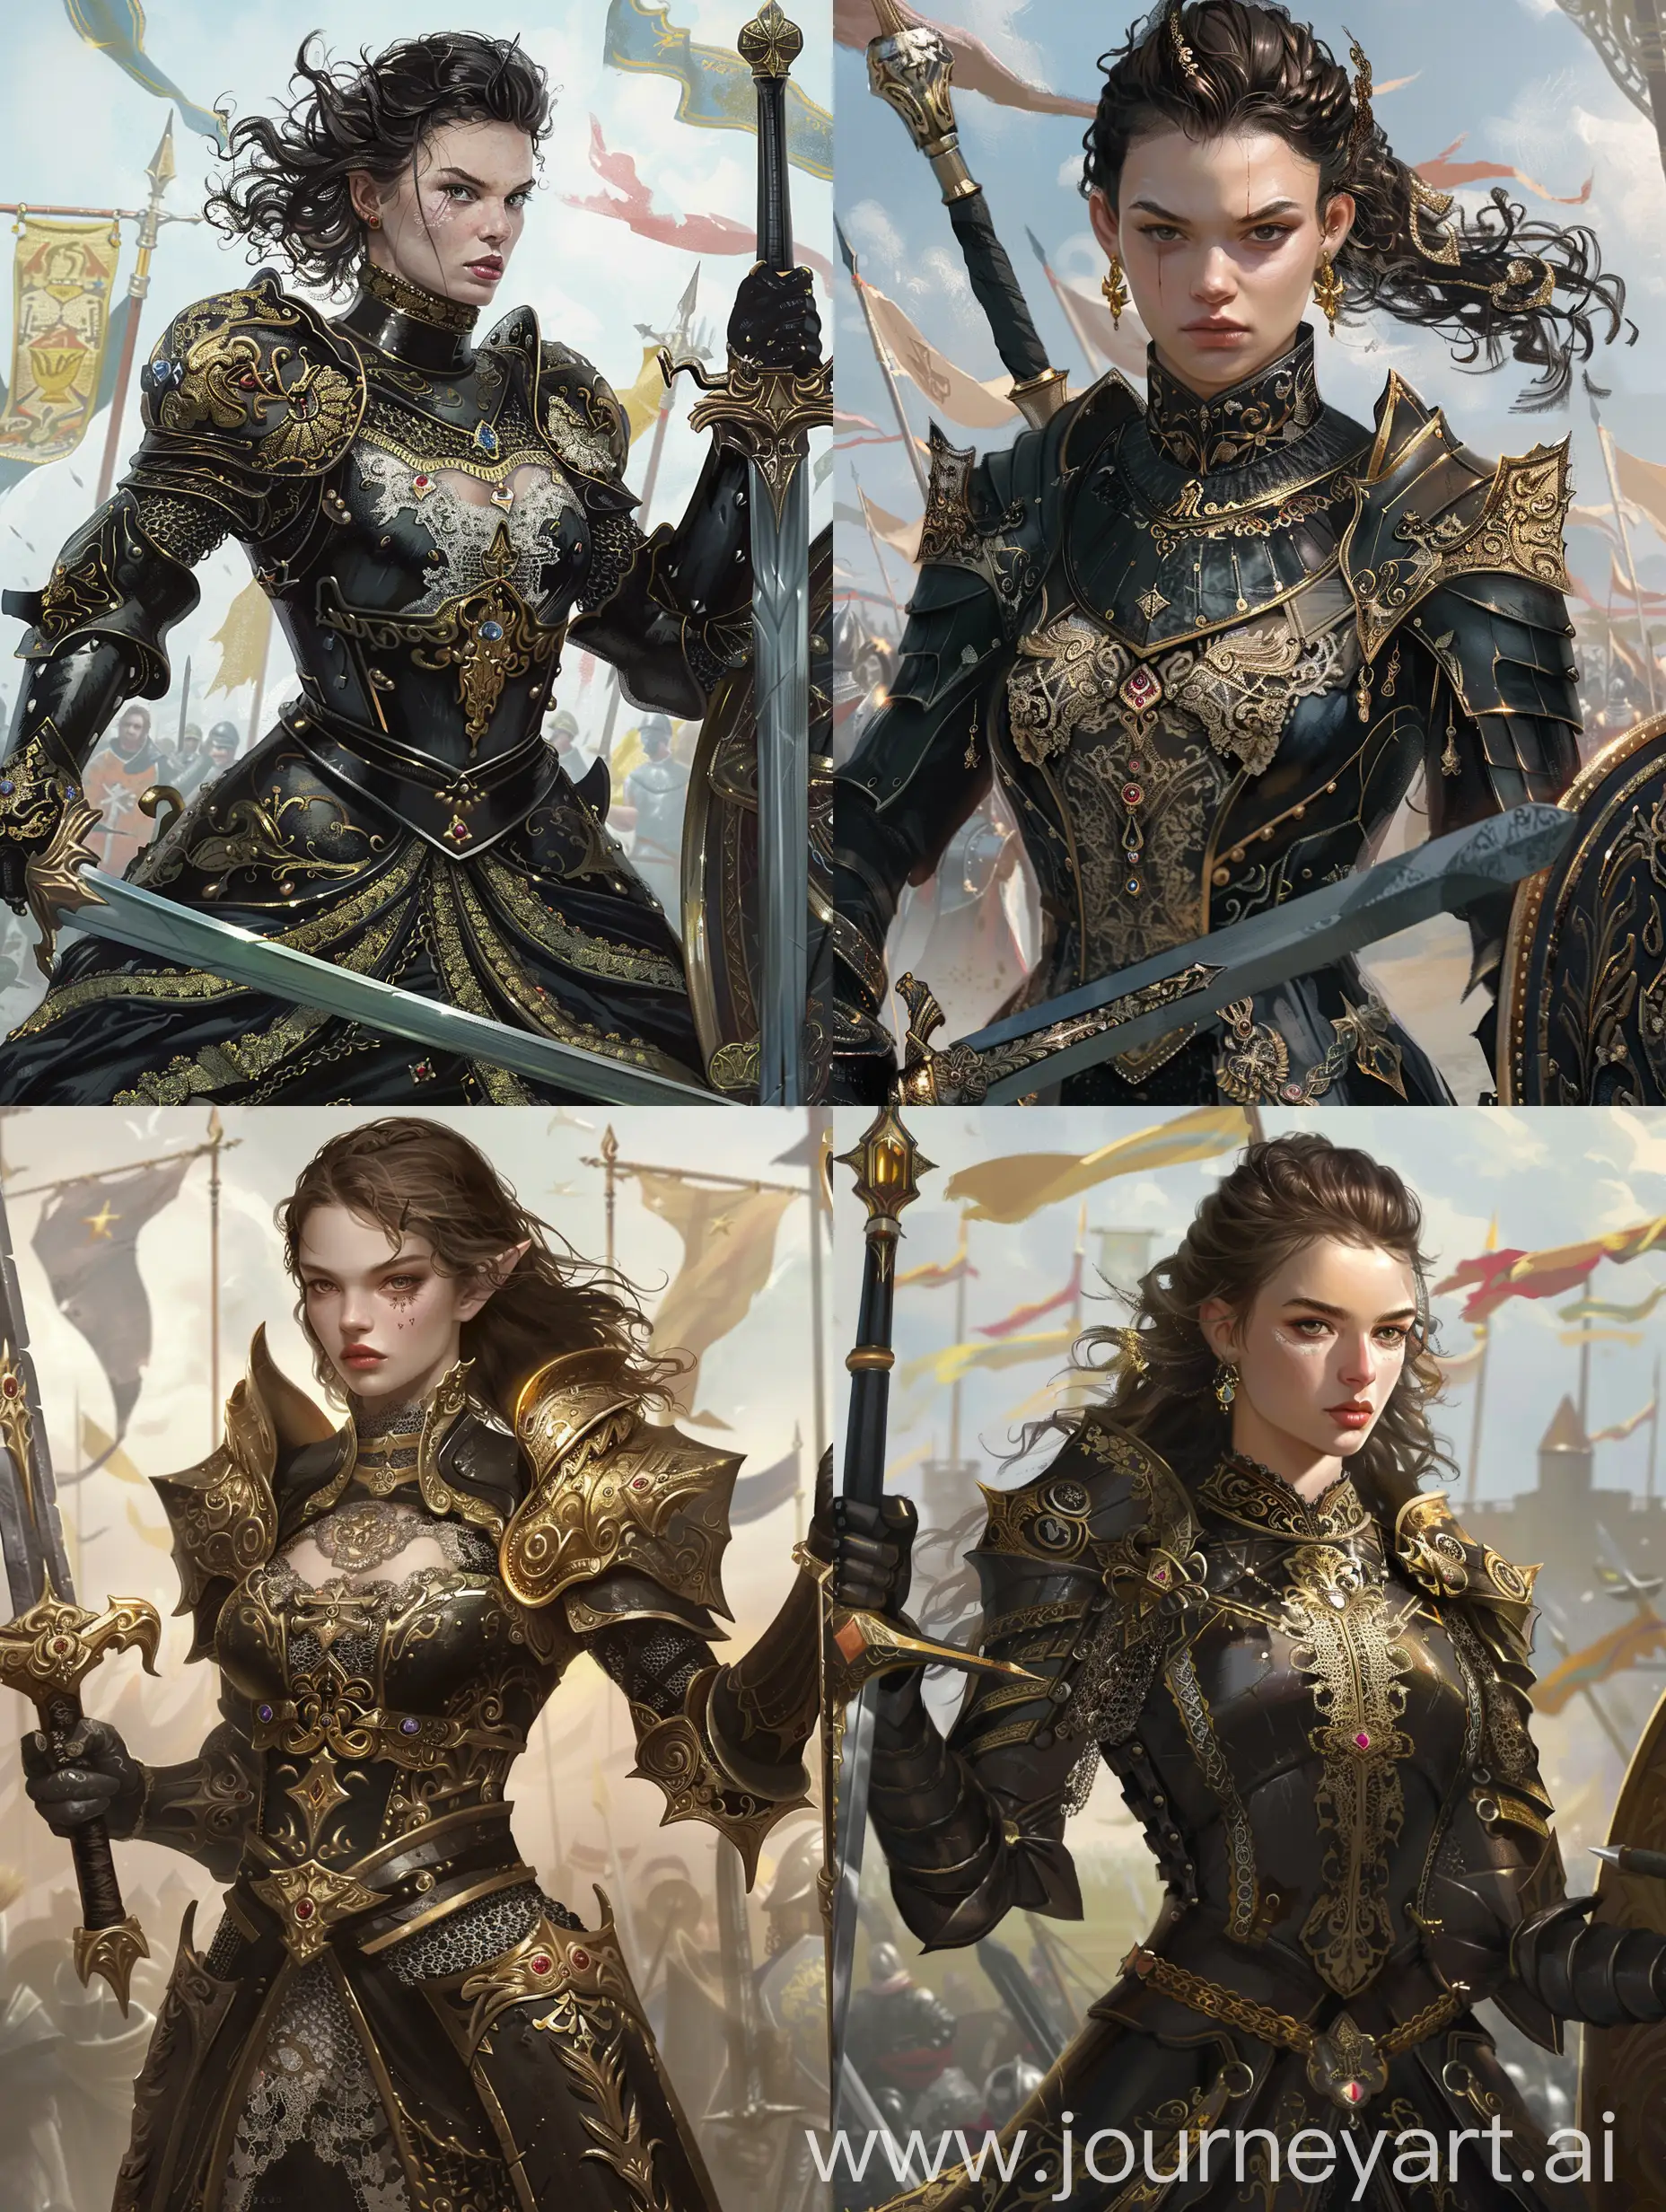 A fierce female warrior clad in sleek black and gold armor adorned with intricate lace and jewel details. She wields a sword in one hand and a shield in the other, gazing into the horizon with an air of unwavering determination. The backdrop is a medieval battlefield with banners fluttering in the wind.